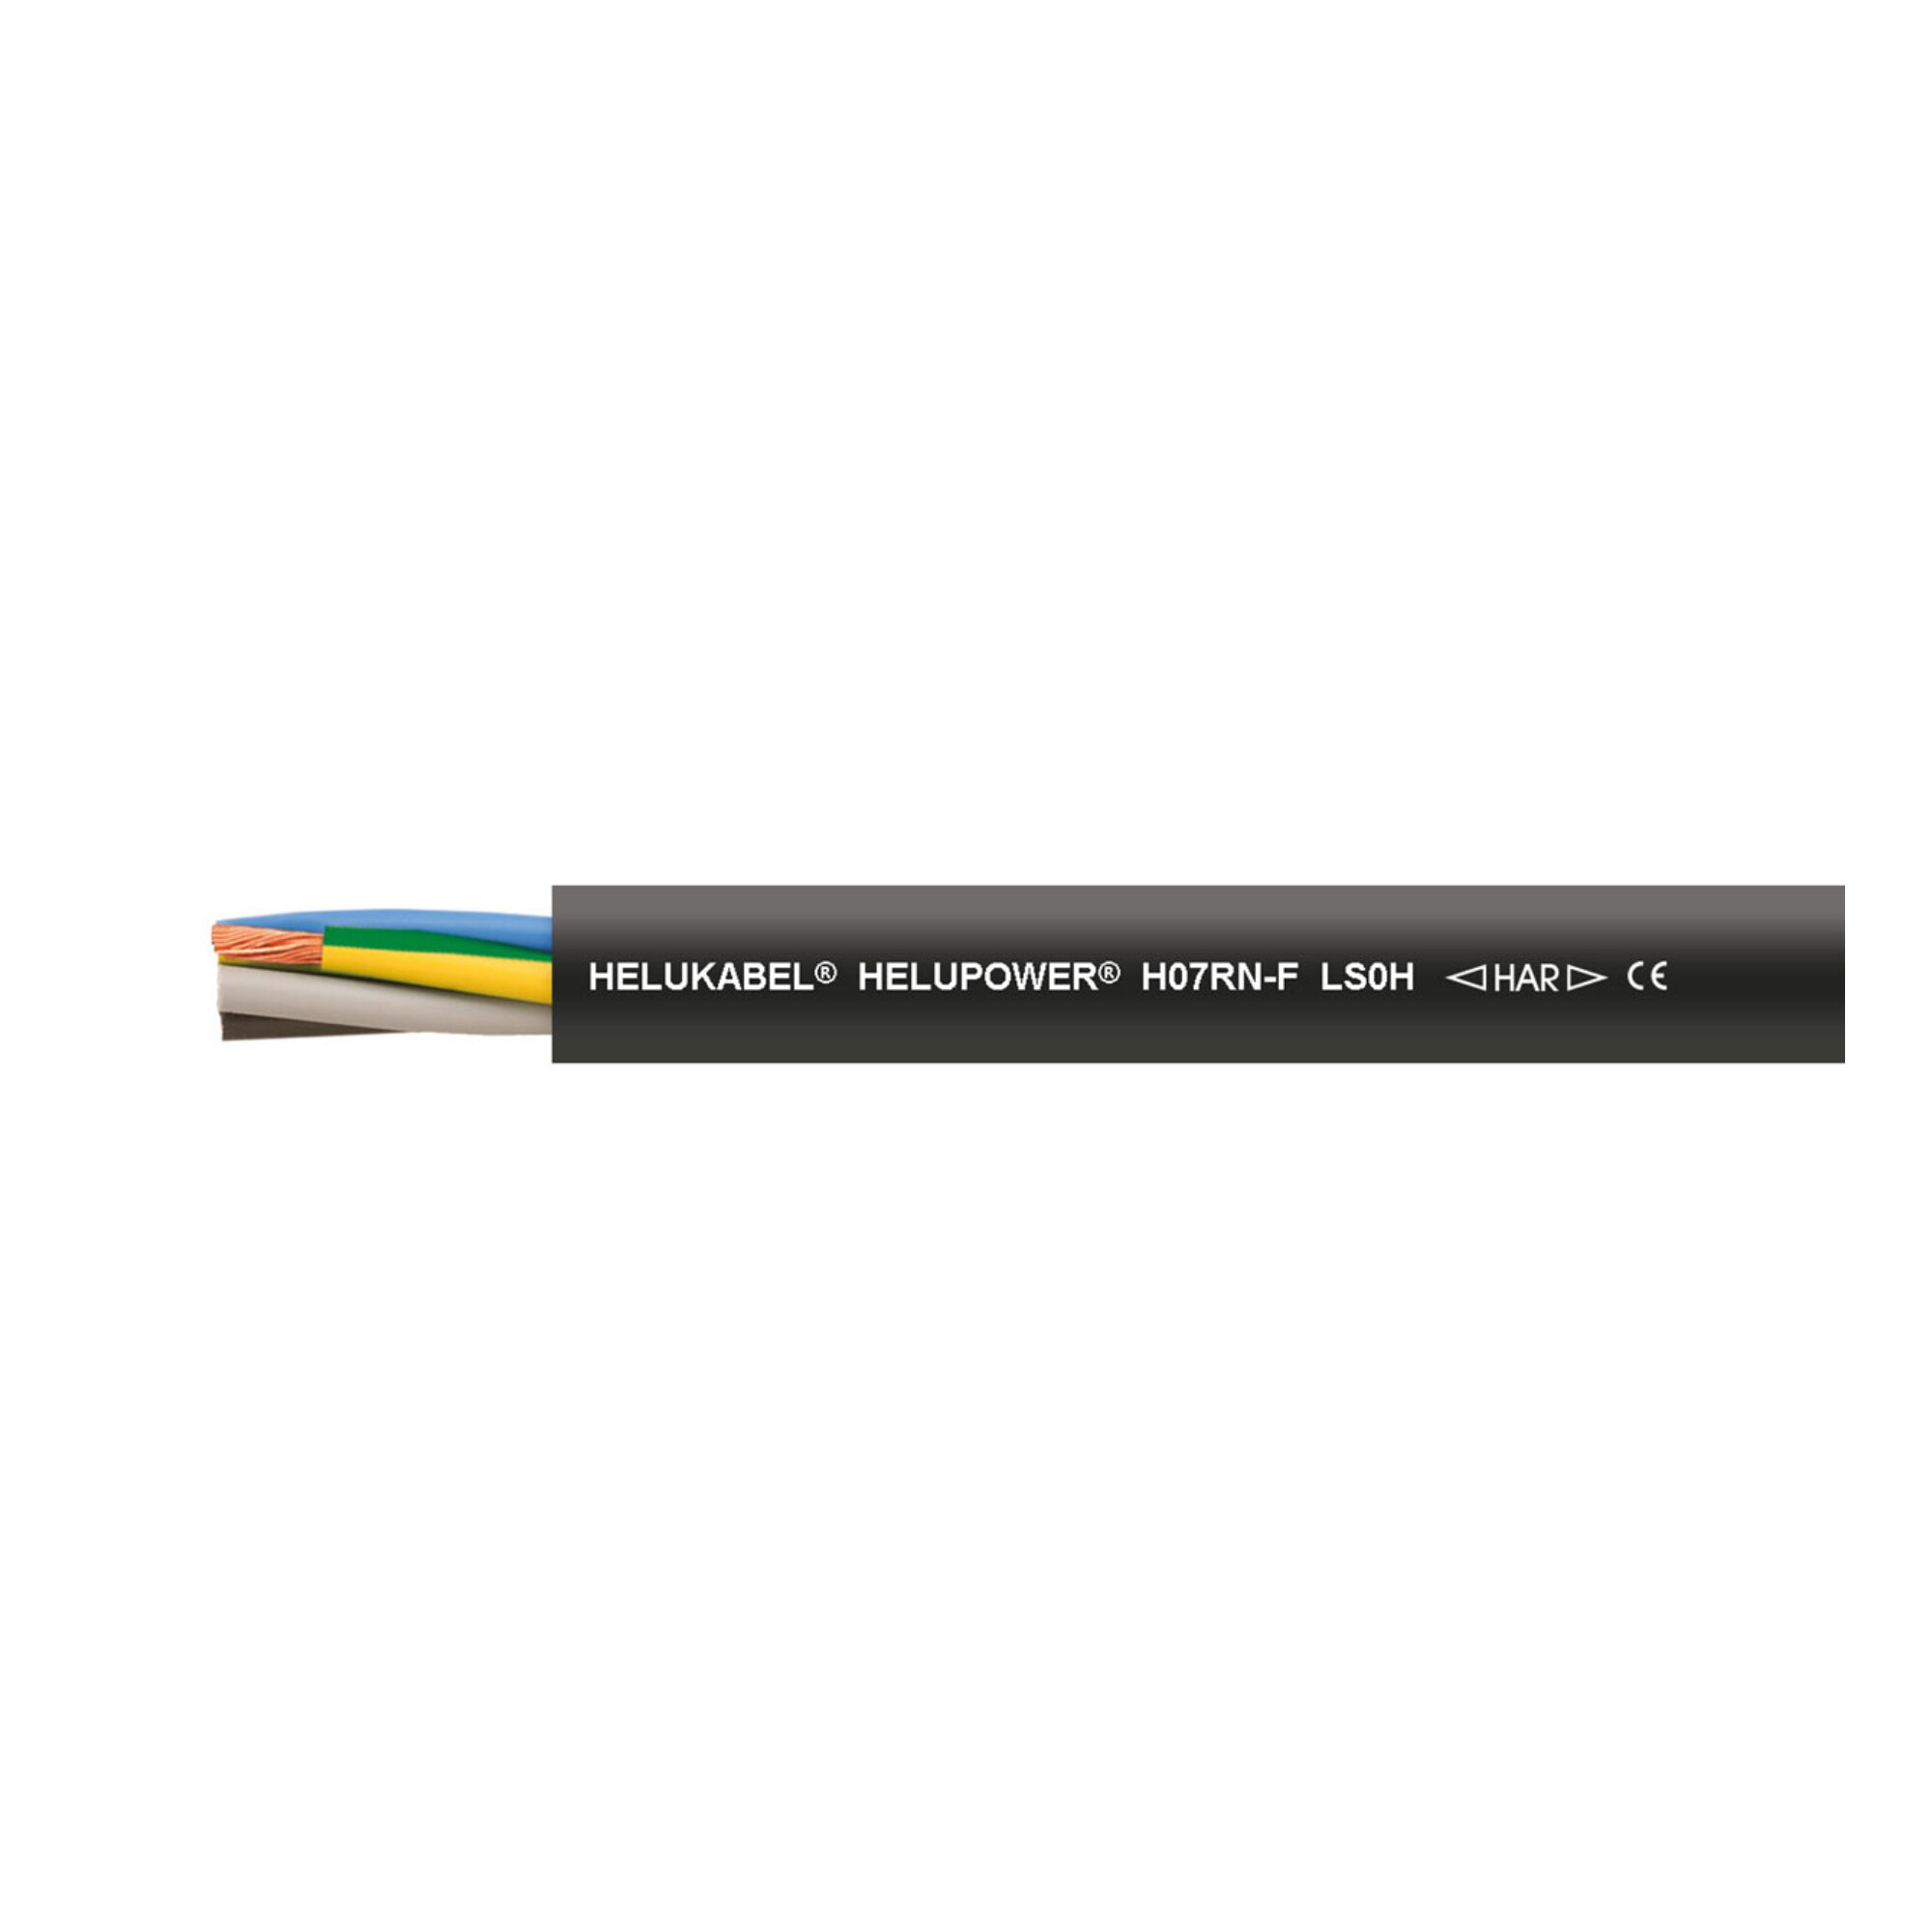 30-30786H0500 HELUPOWER H07RN-F LS0H The HELUPOWER H07RN-F LS0H is a halogen-free rubber cable for use in dry, damp, wet areas and outdoors with medium mechanical stress situations.